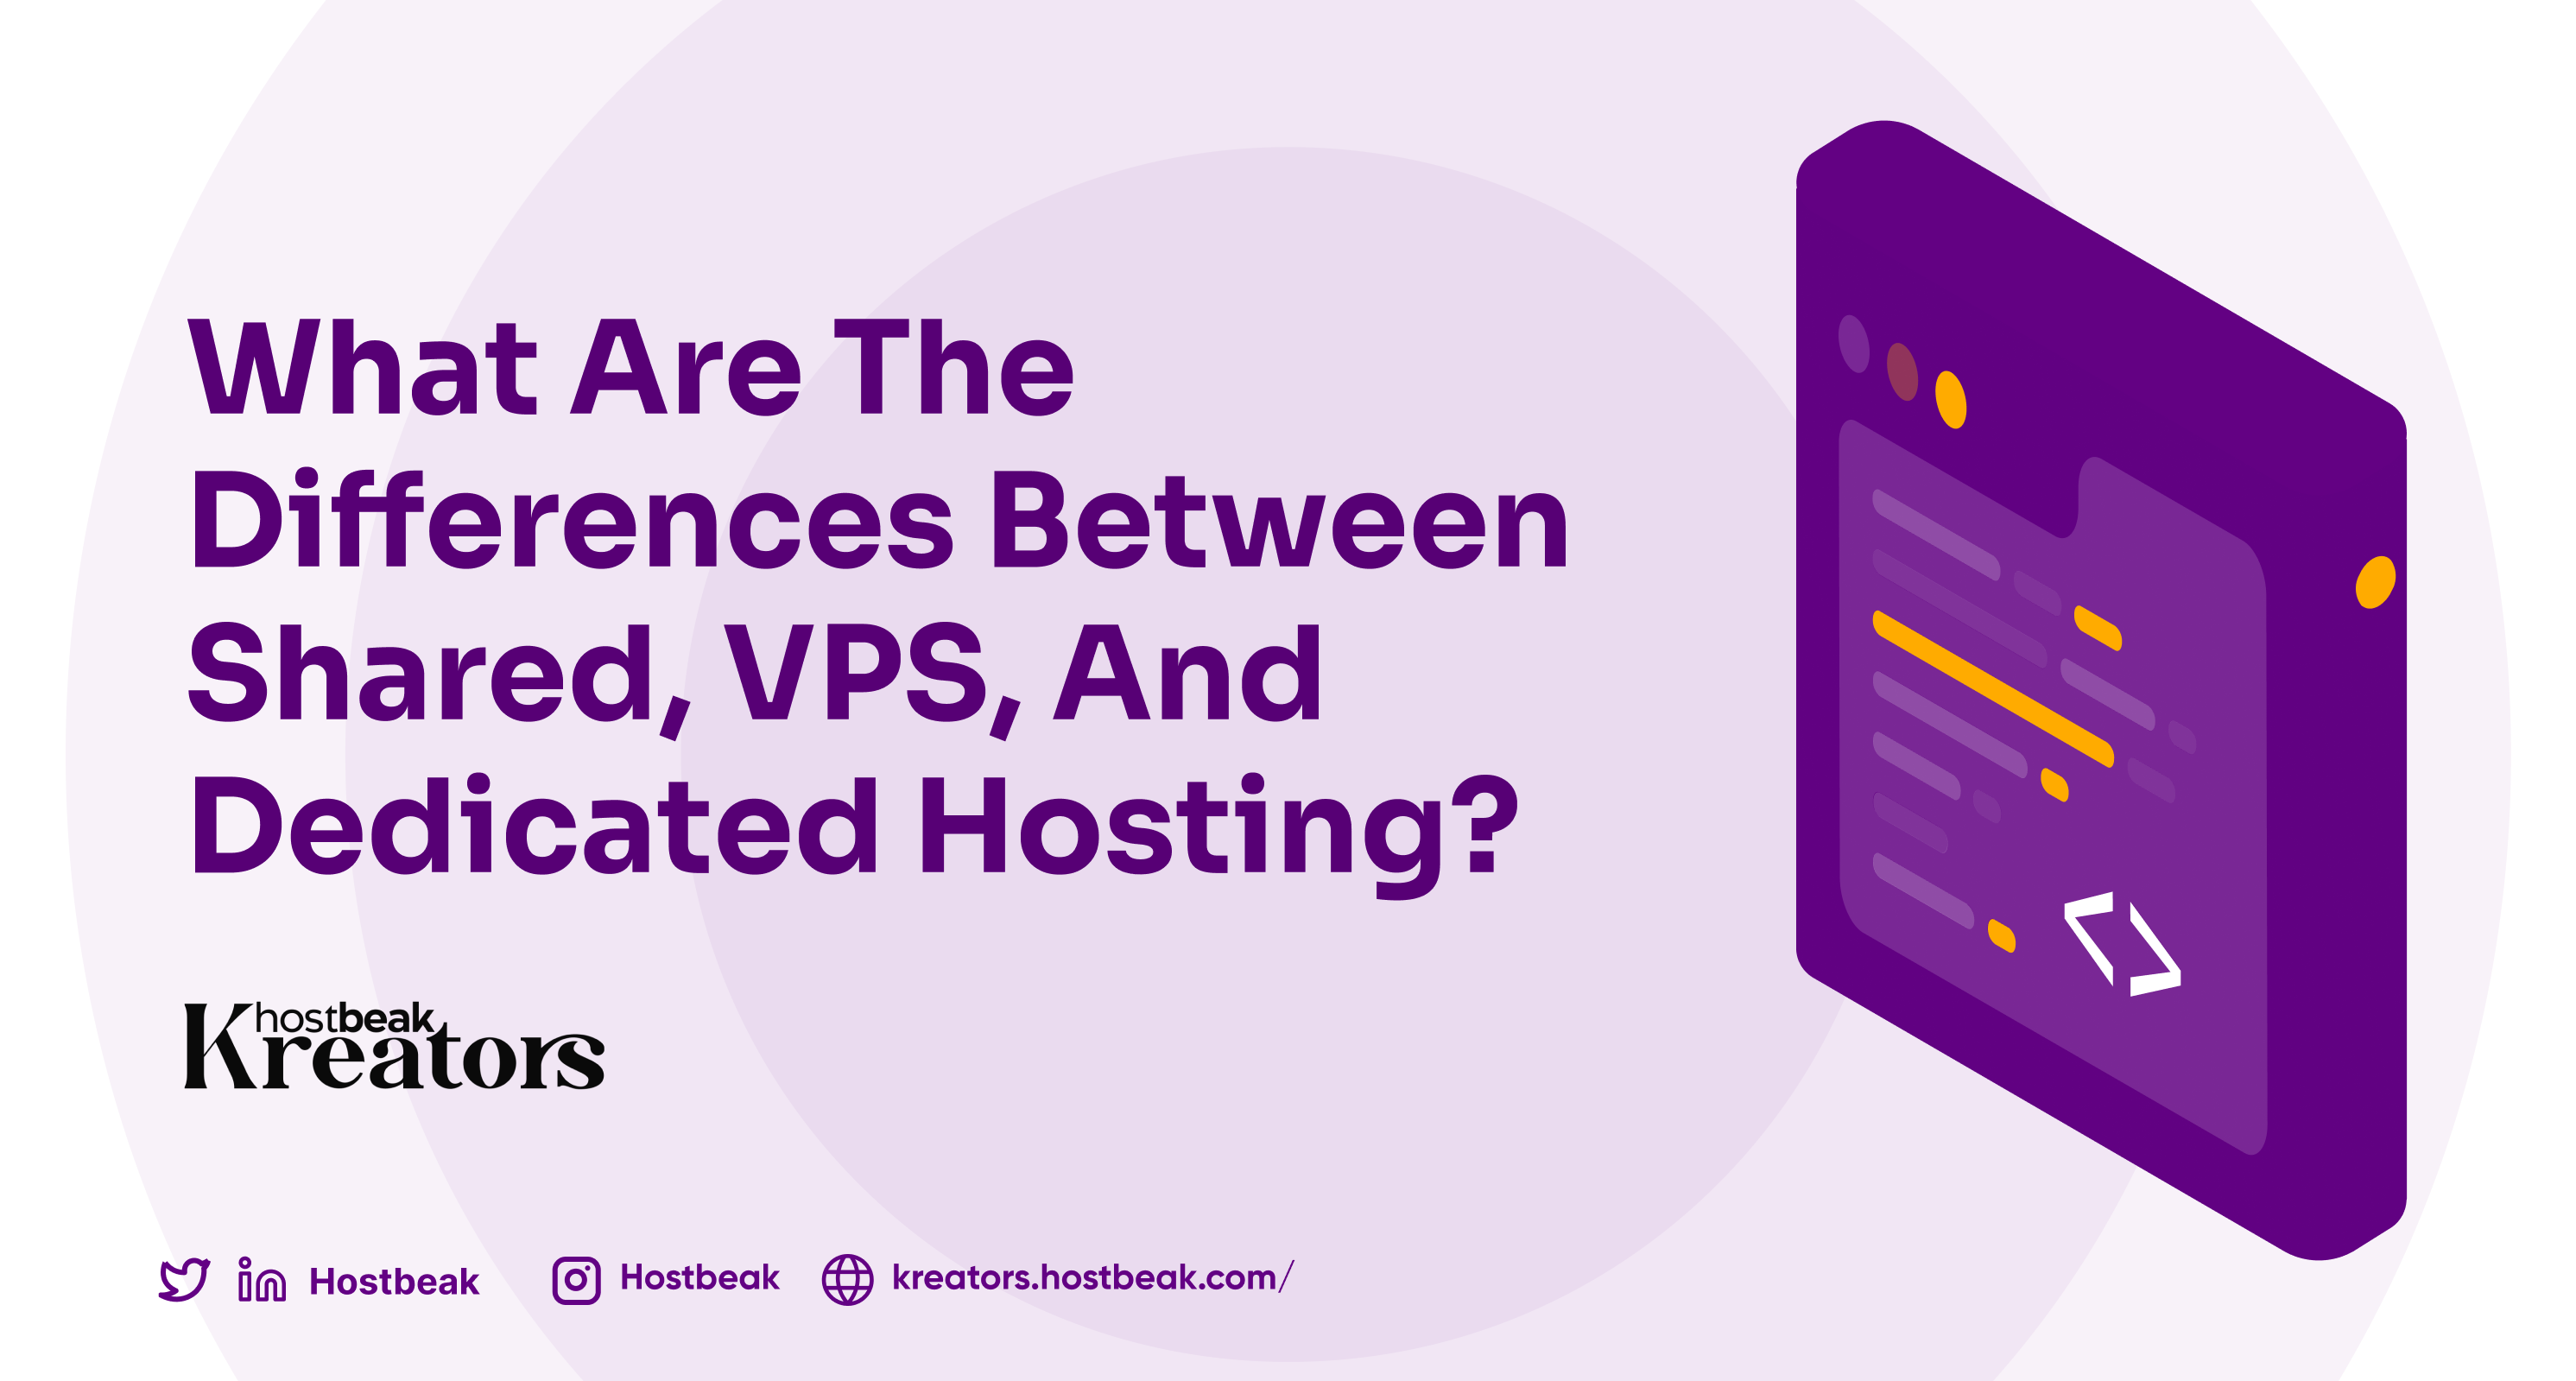 What Are the Differences Between Shared, VPS, and Dedicated Hosting?